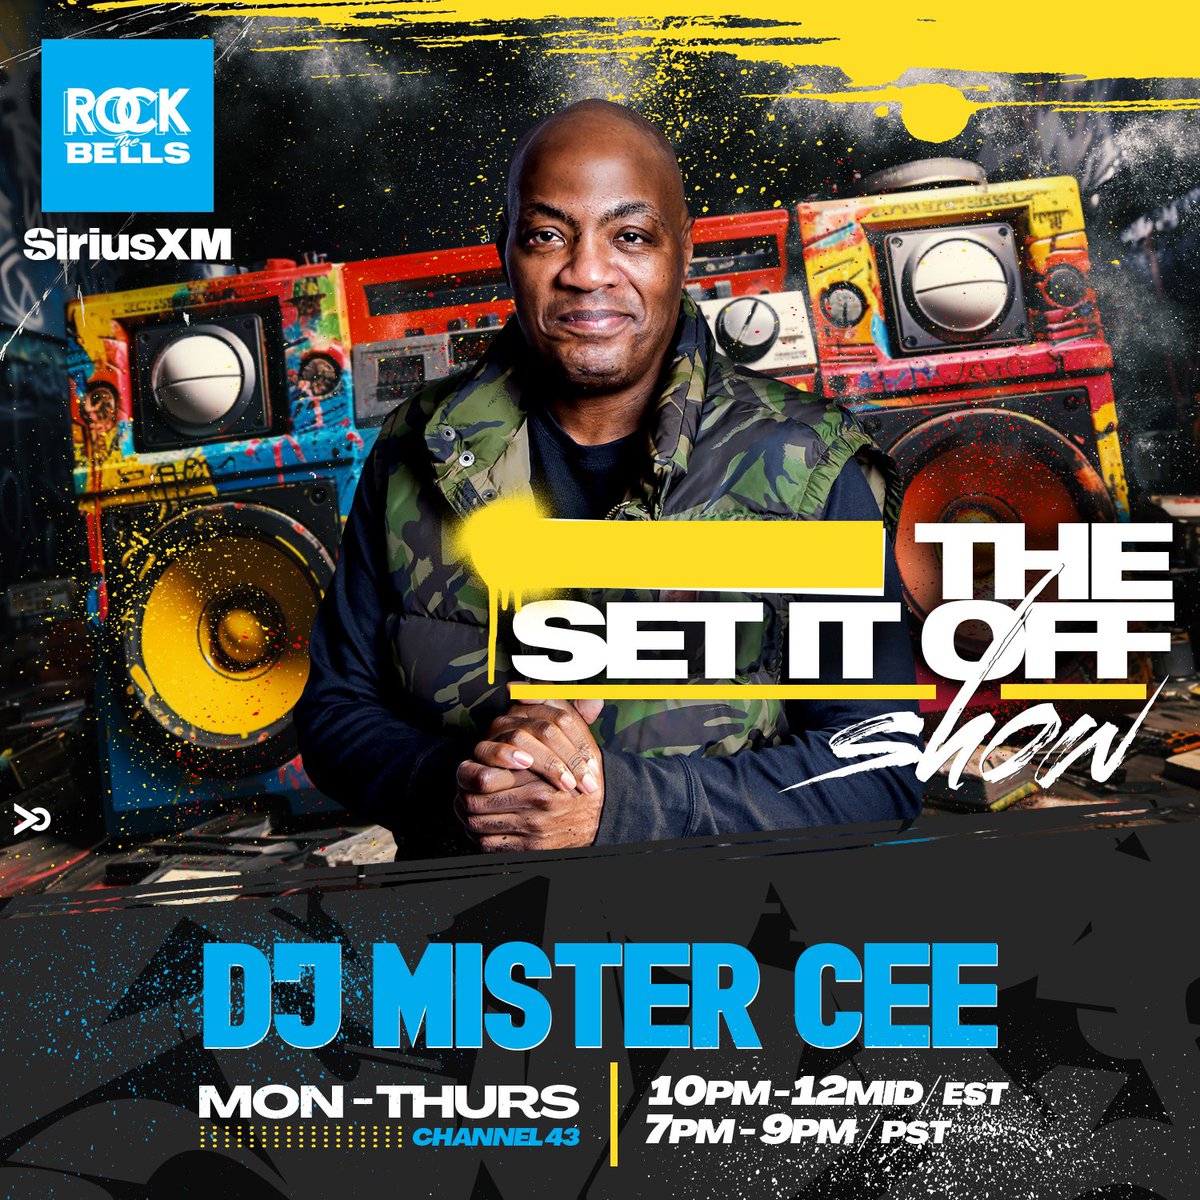 2NITE!!! THE SET IT OFF SHOW WIT @djmistercee AIRING MON-THURS 10PM-12MID(EAST COAST) 7PM-9PM(WEST COAST) ON LL COOL J @llcoolj ROCK THE BELLS RADIO @rockthebells ON SIRIUS XM CHANNEL 43!!! @siriusxm PLAYING CLASSIC/TIMELESS HIP HOP FROM THE 80’s 90’s & 2000’S!!!